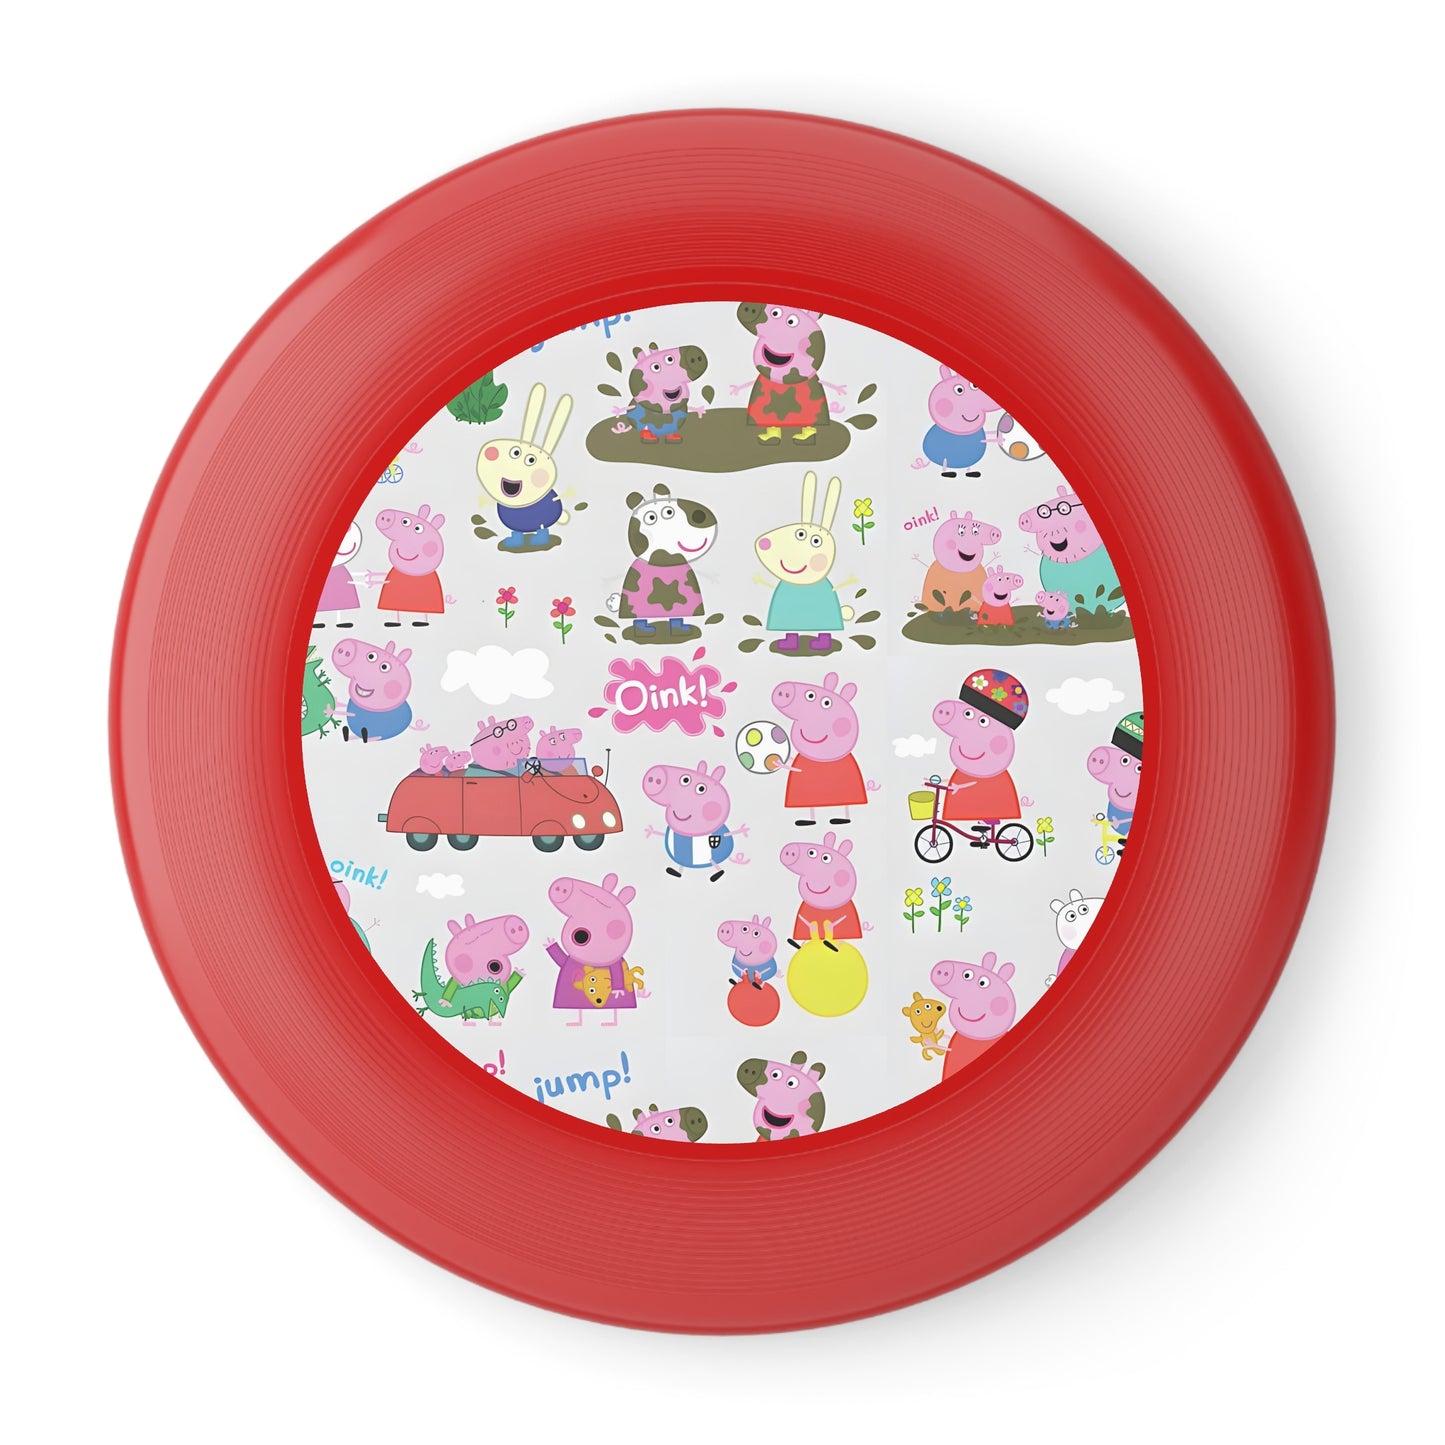 Peppa Pig Oink Oink Collage Wham-O Frisbee